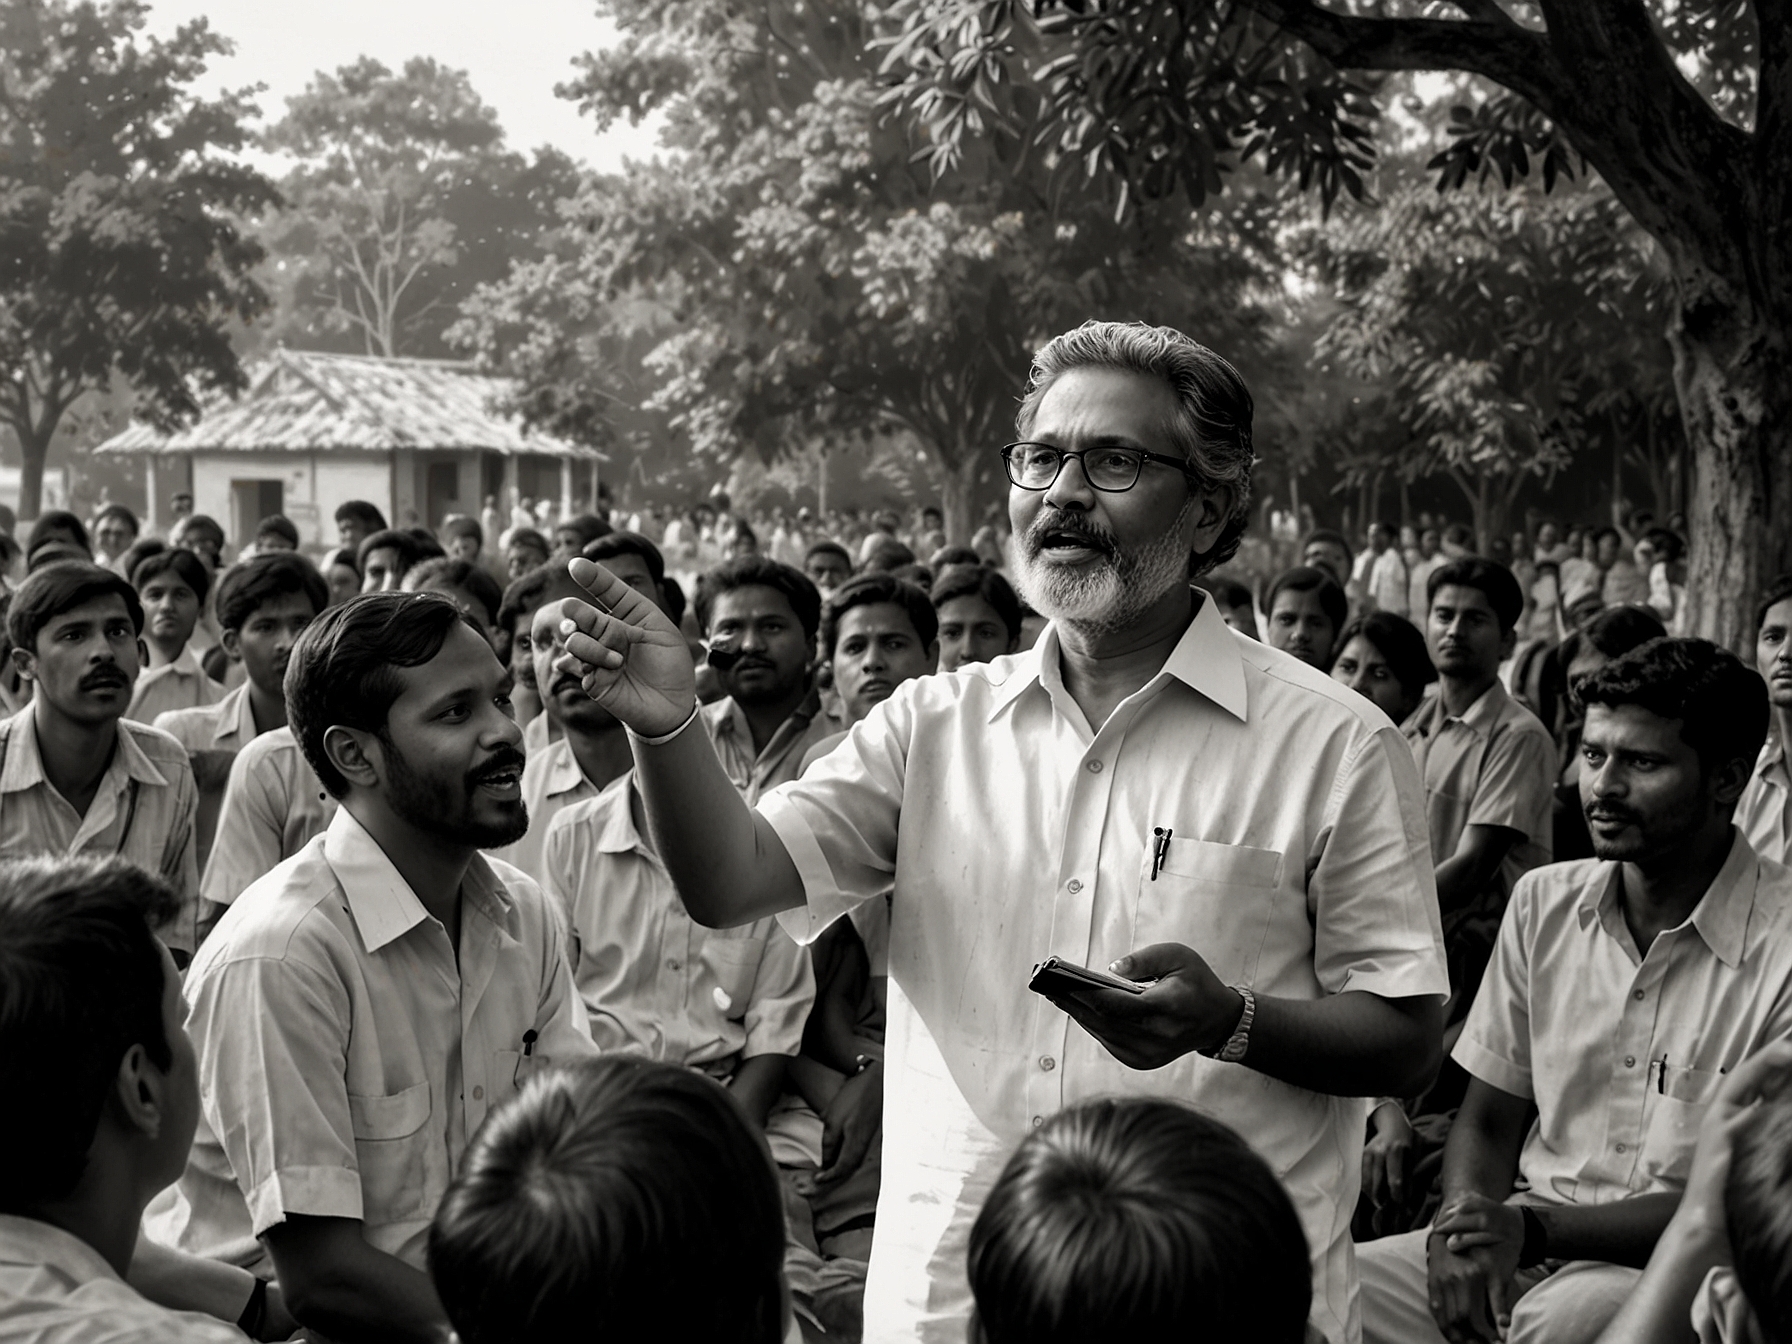 Kodikunnil Suresh addressing a public gathering, emphasizing his advocacy for the rights of marginalized communities and his active involvement in social initiatives at the grassroots level.